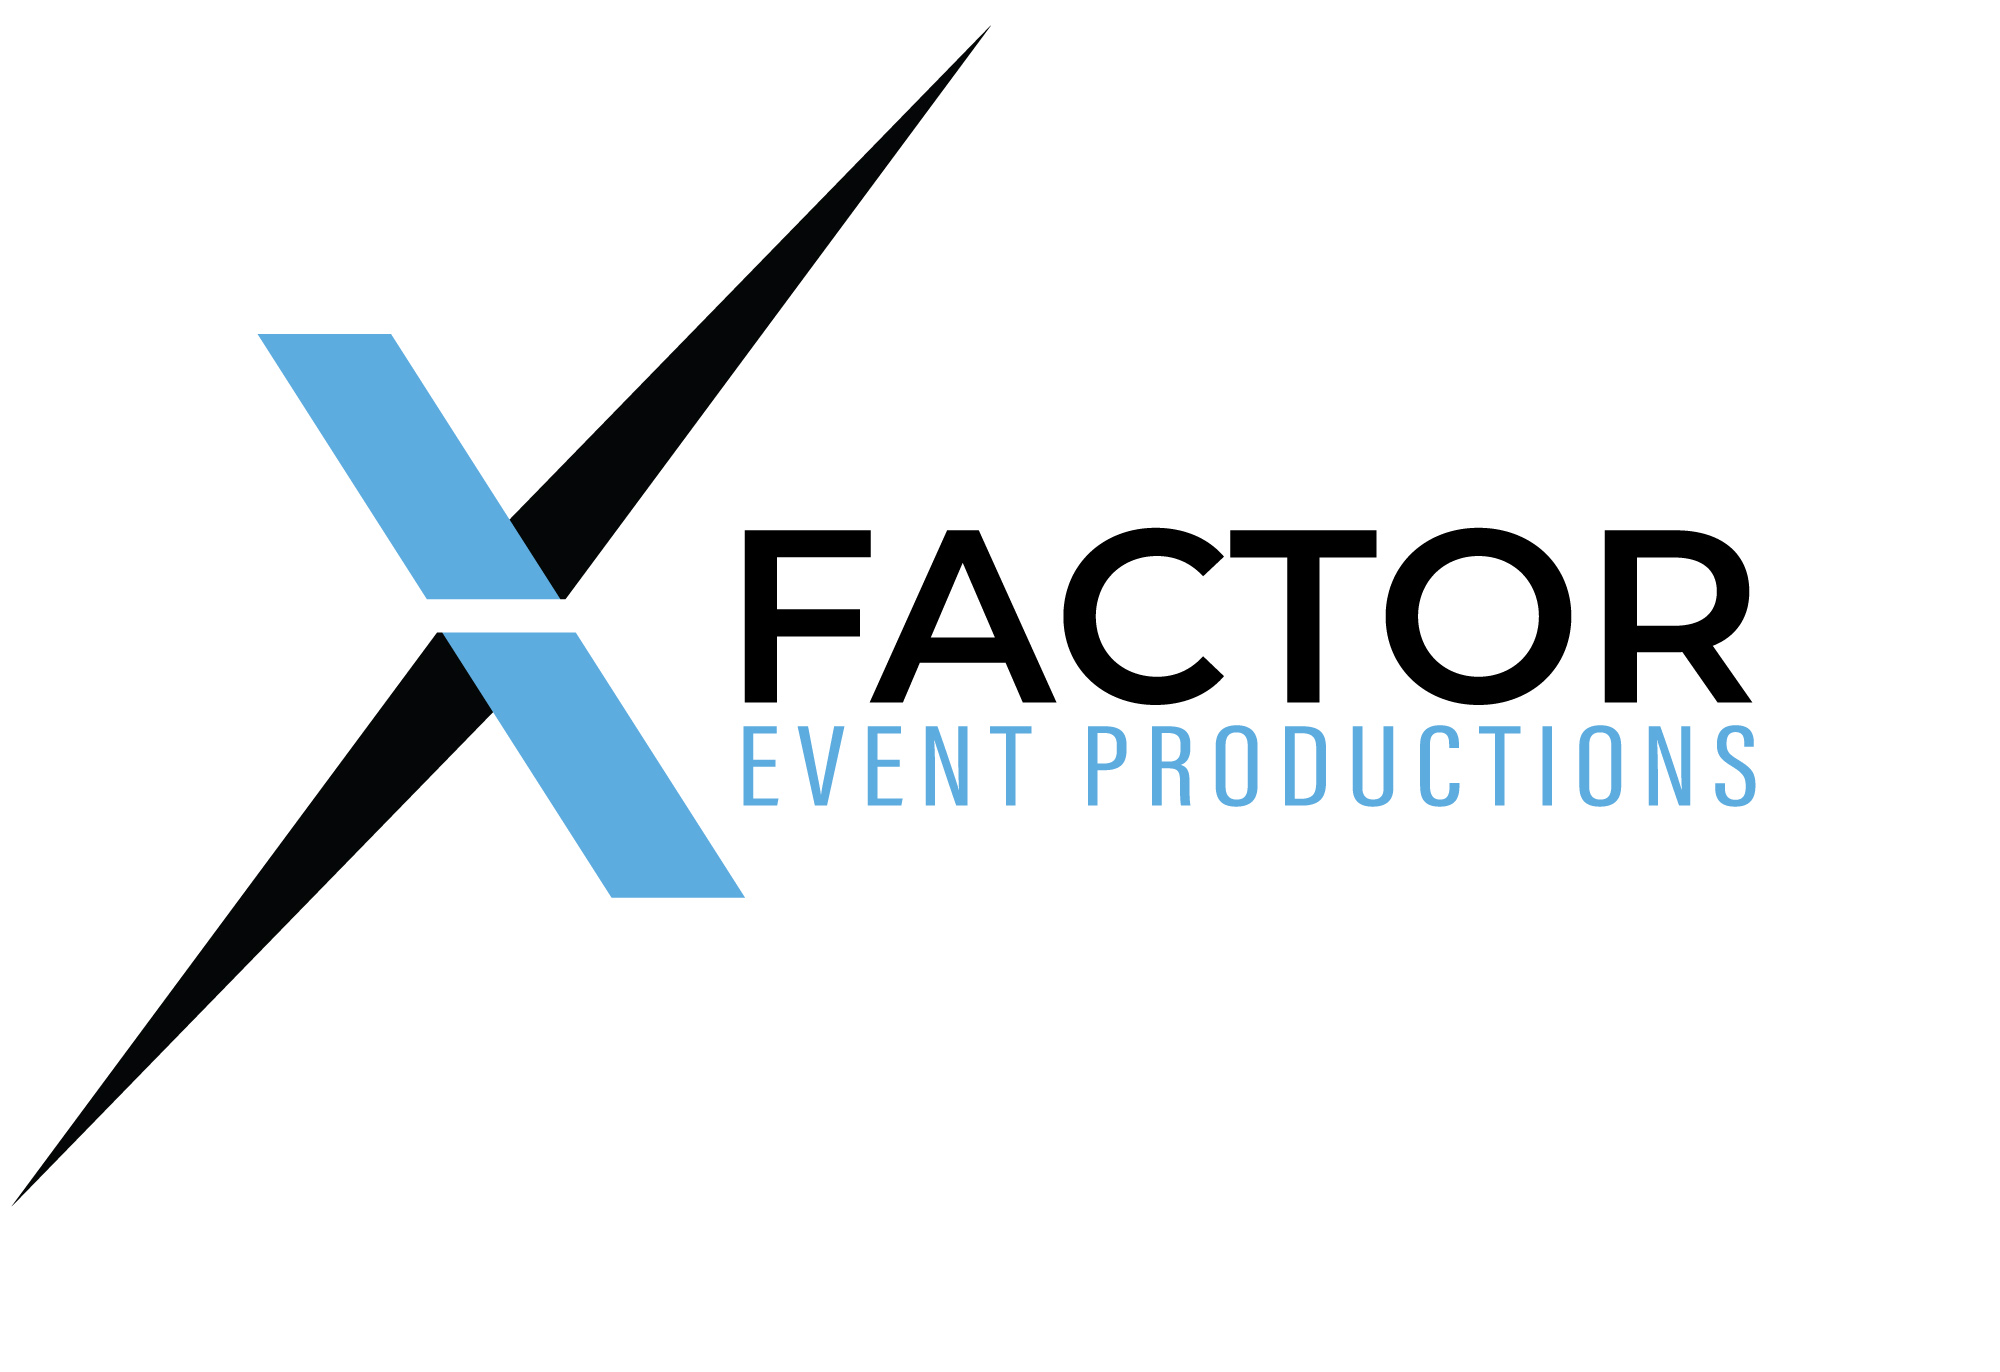 XFactor Productions